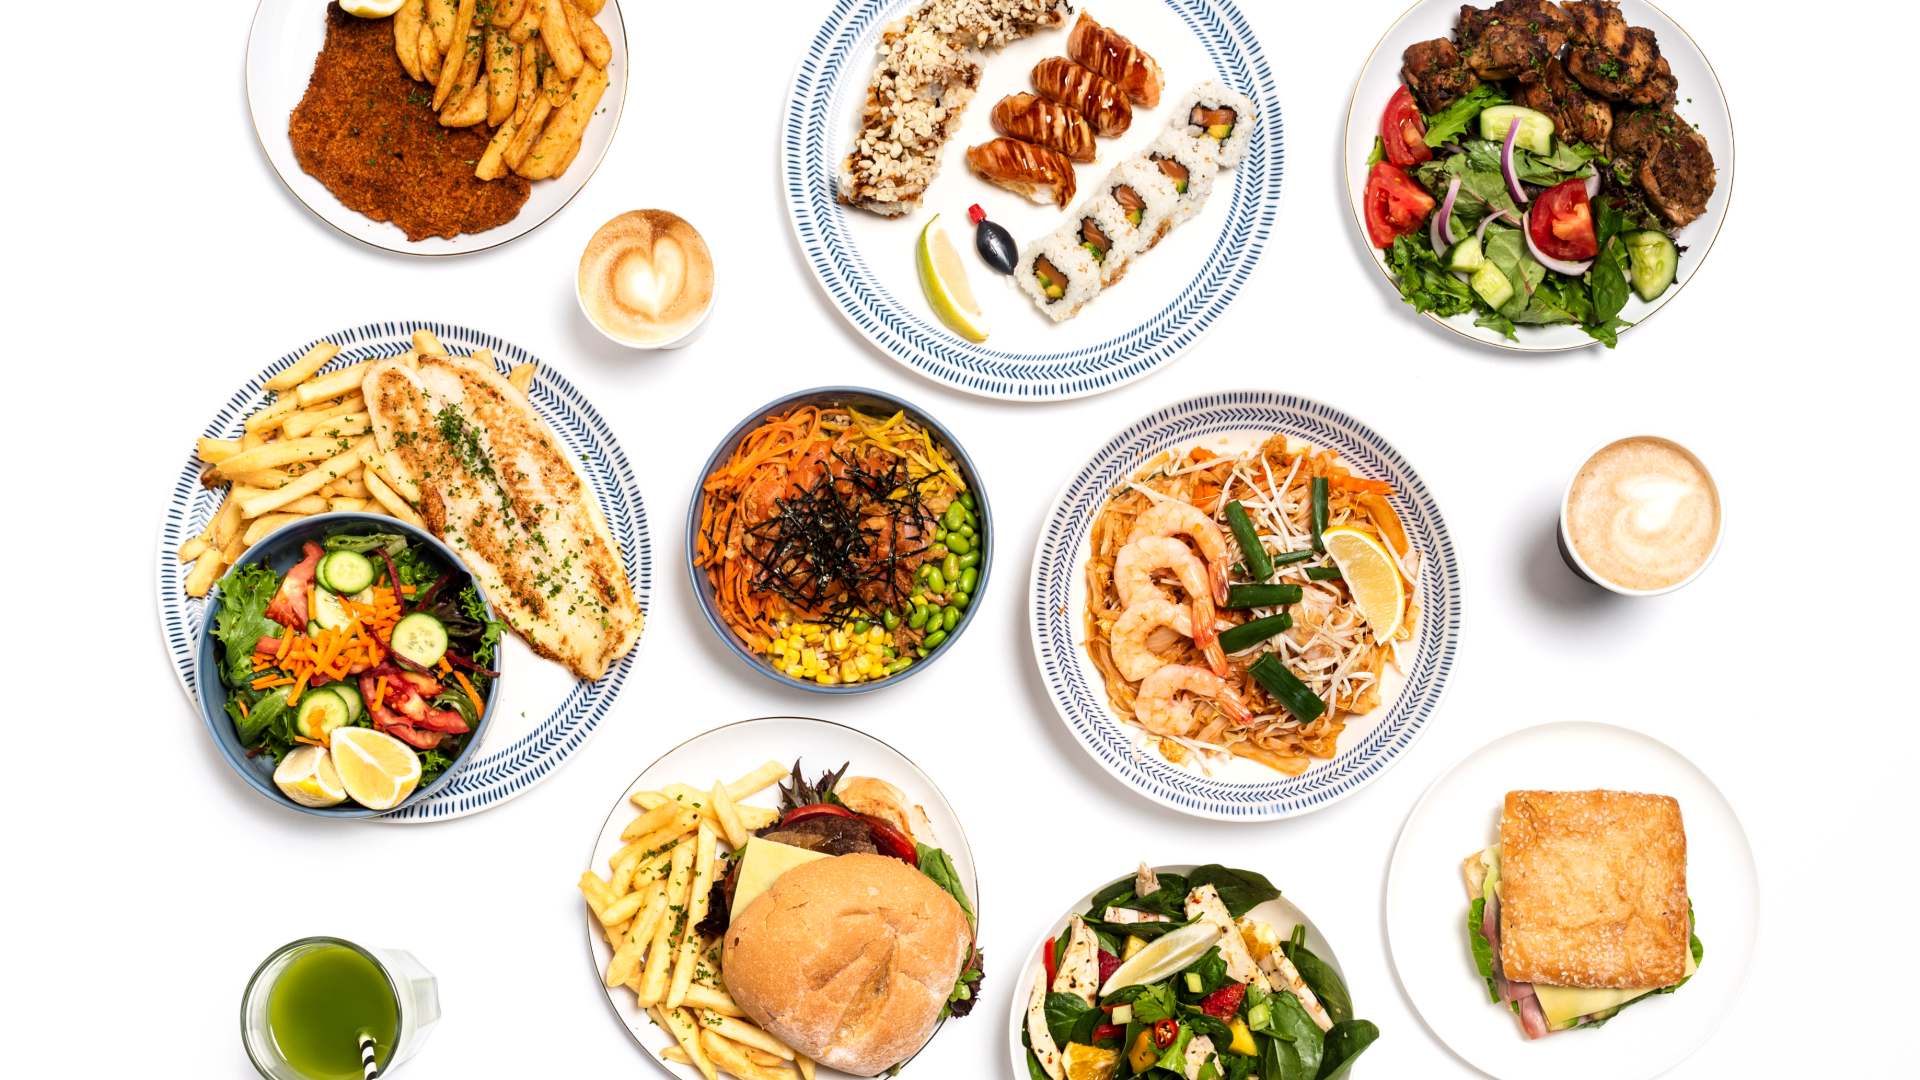 Food App Ritual Is Offering $1 Lunches for CBD Workers All Week